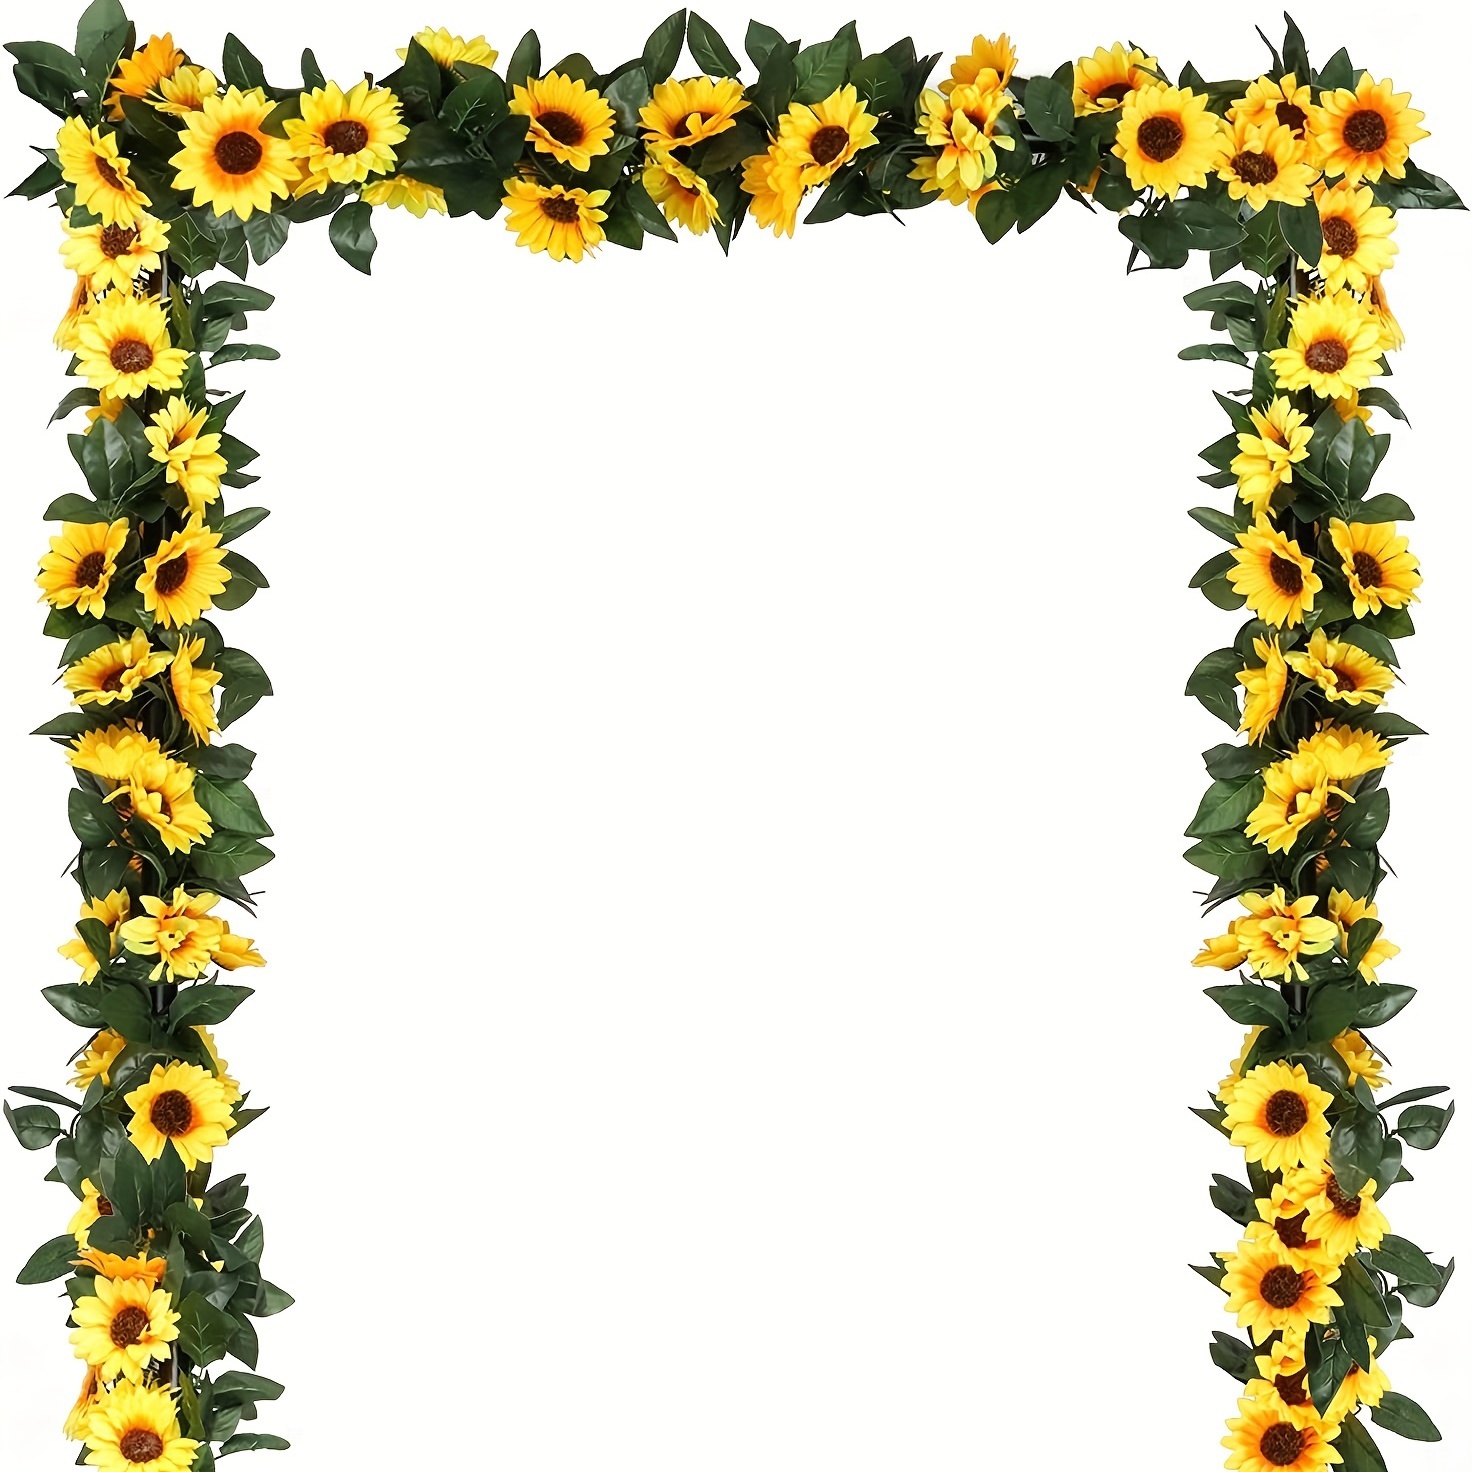 

2pcs 16ft Sunflower Garland - Add A Touch Of Beauty To Your Home Decor, Weddings, Parties & More!